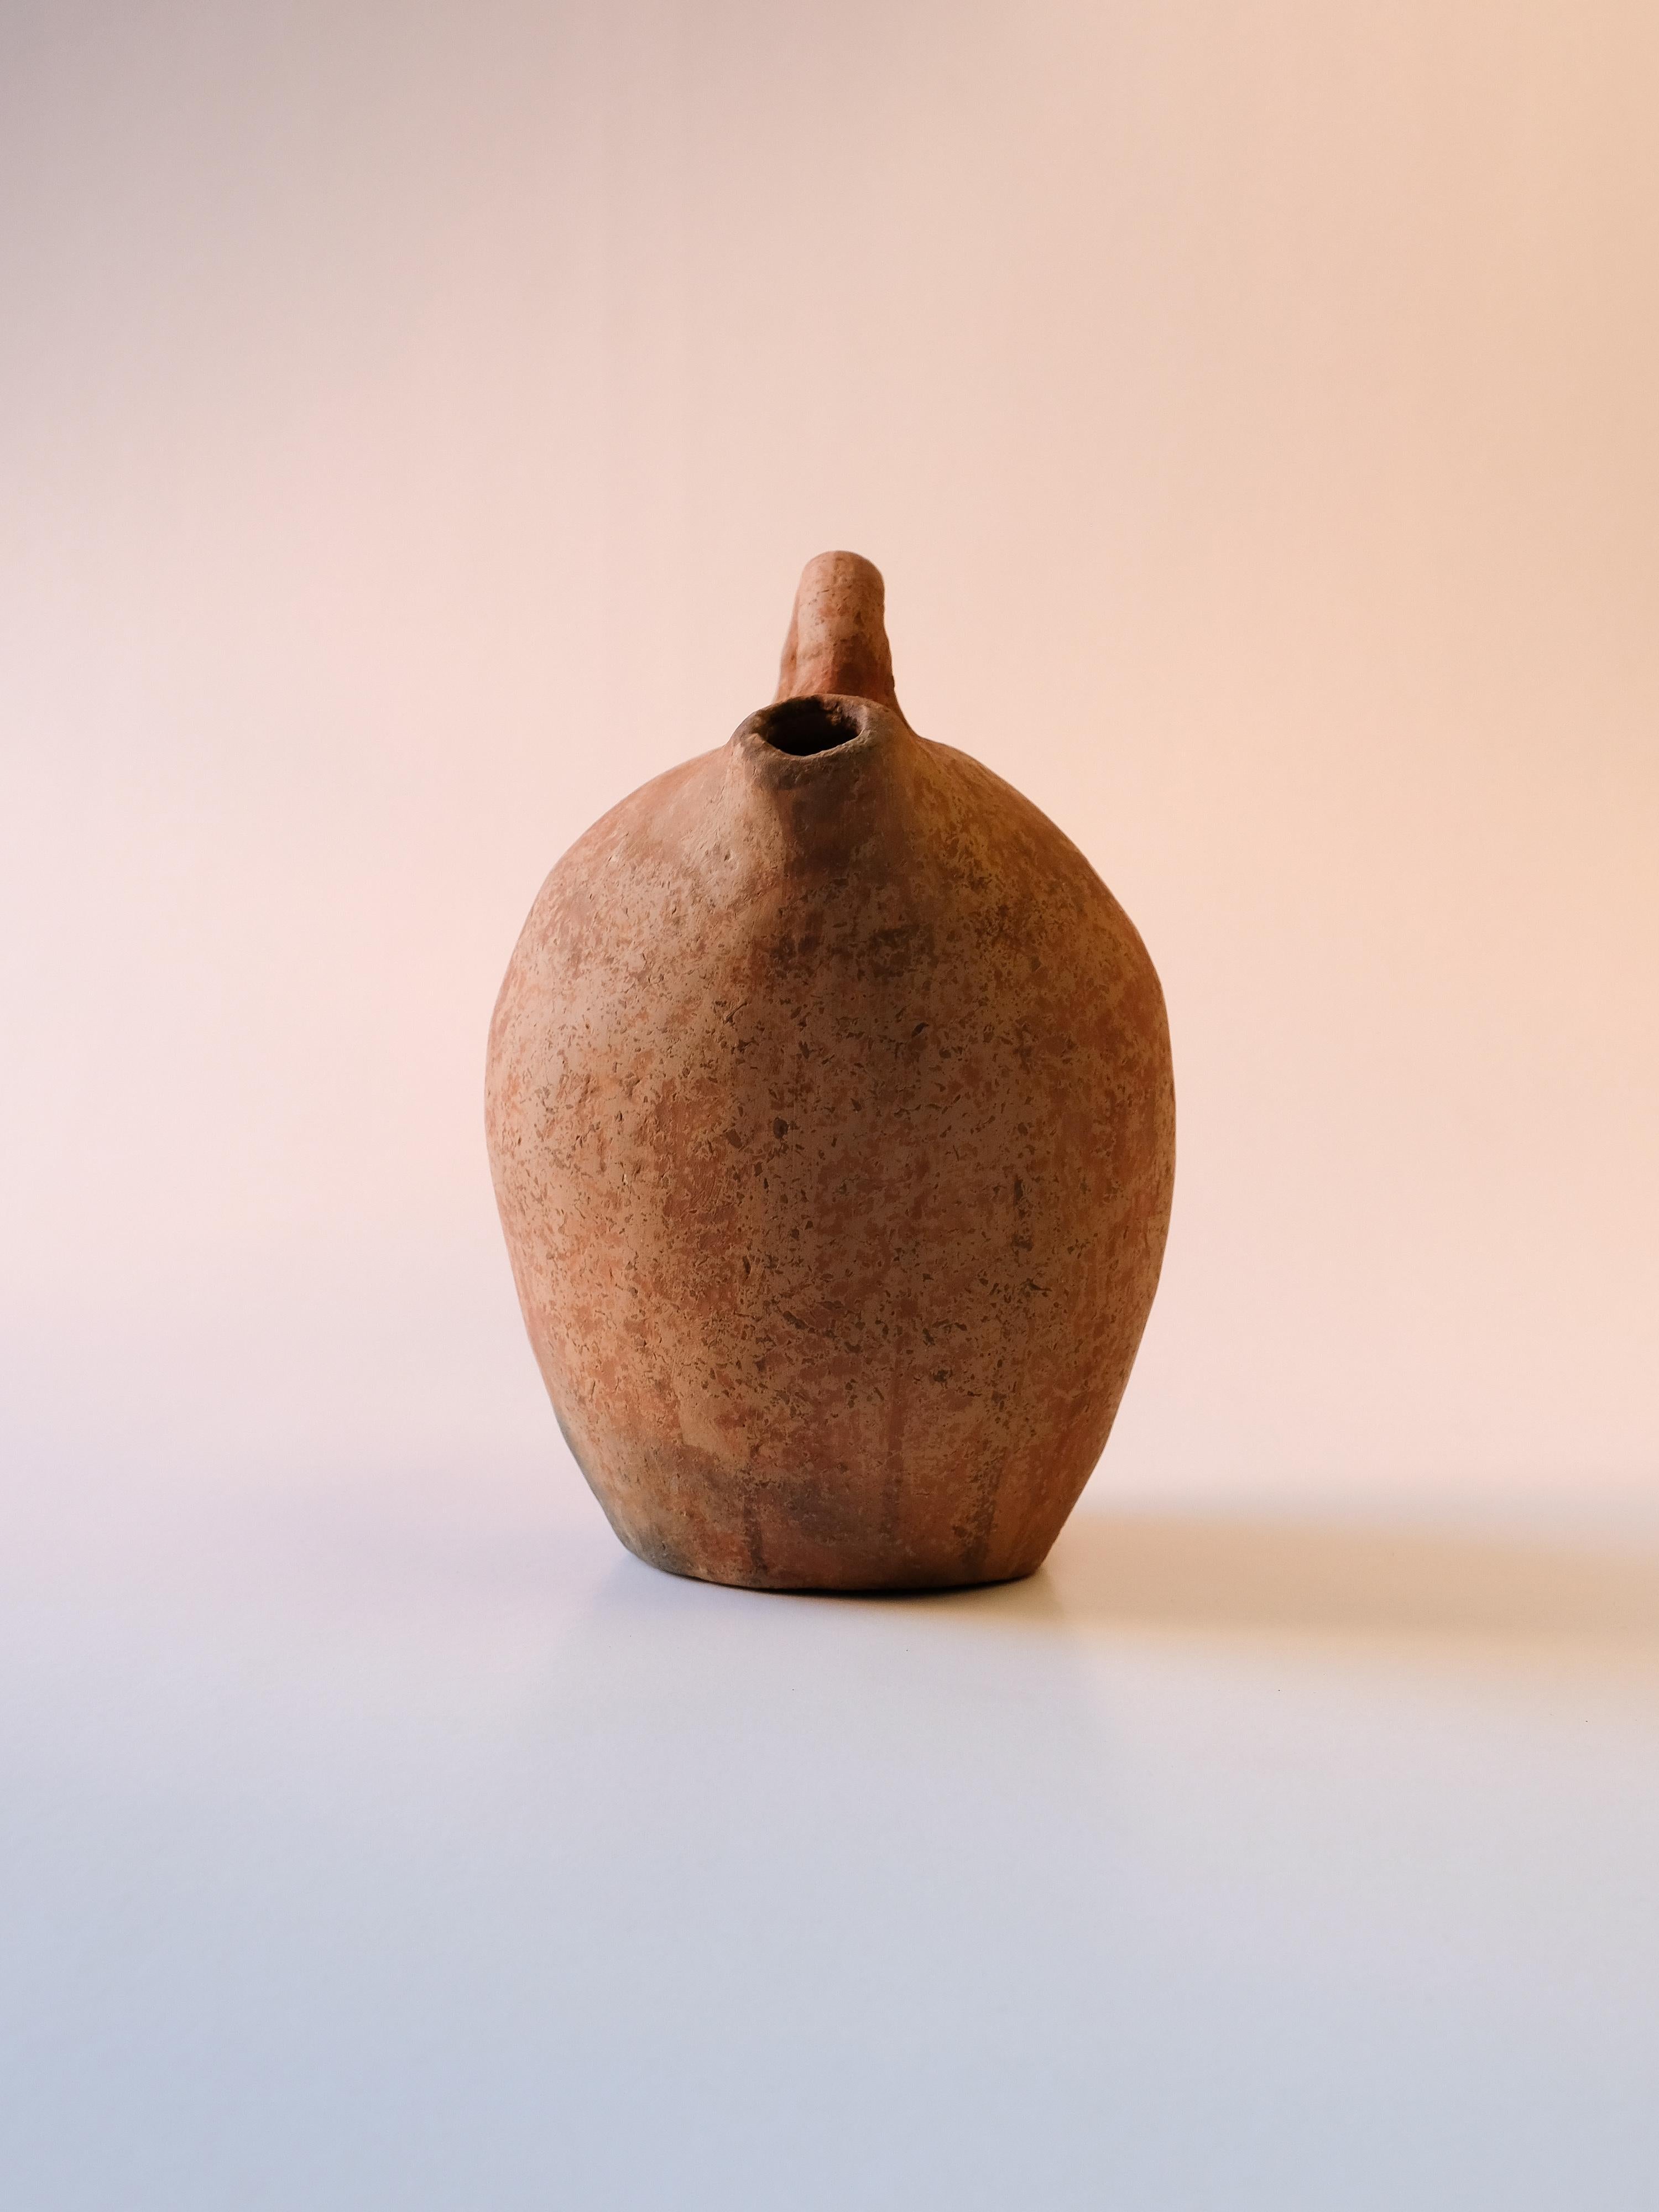 - Handbuilt brown small decorative pot 
- made of clay collected from the potter's surroundings.
- made in the Moroccan Rif mountains by the potter Fatima.

Approximate measurements: 7 x 7 x 8 in // 18 x 18 x 20 cm; 

Handmade: Variation is to